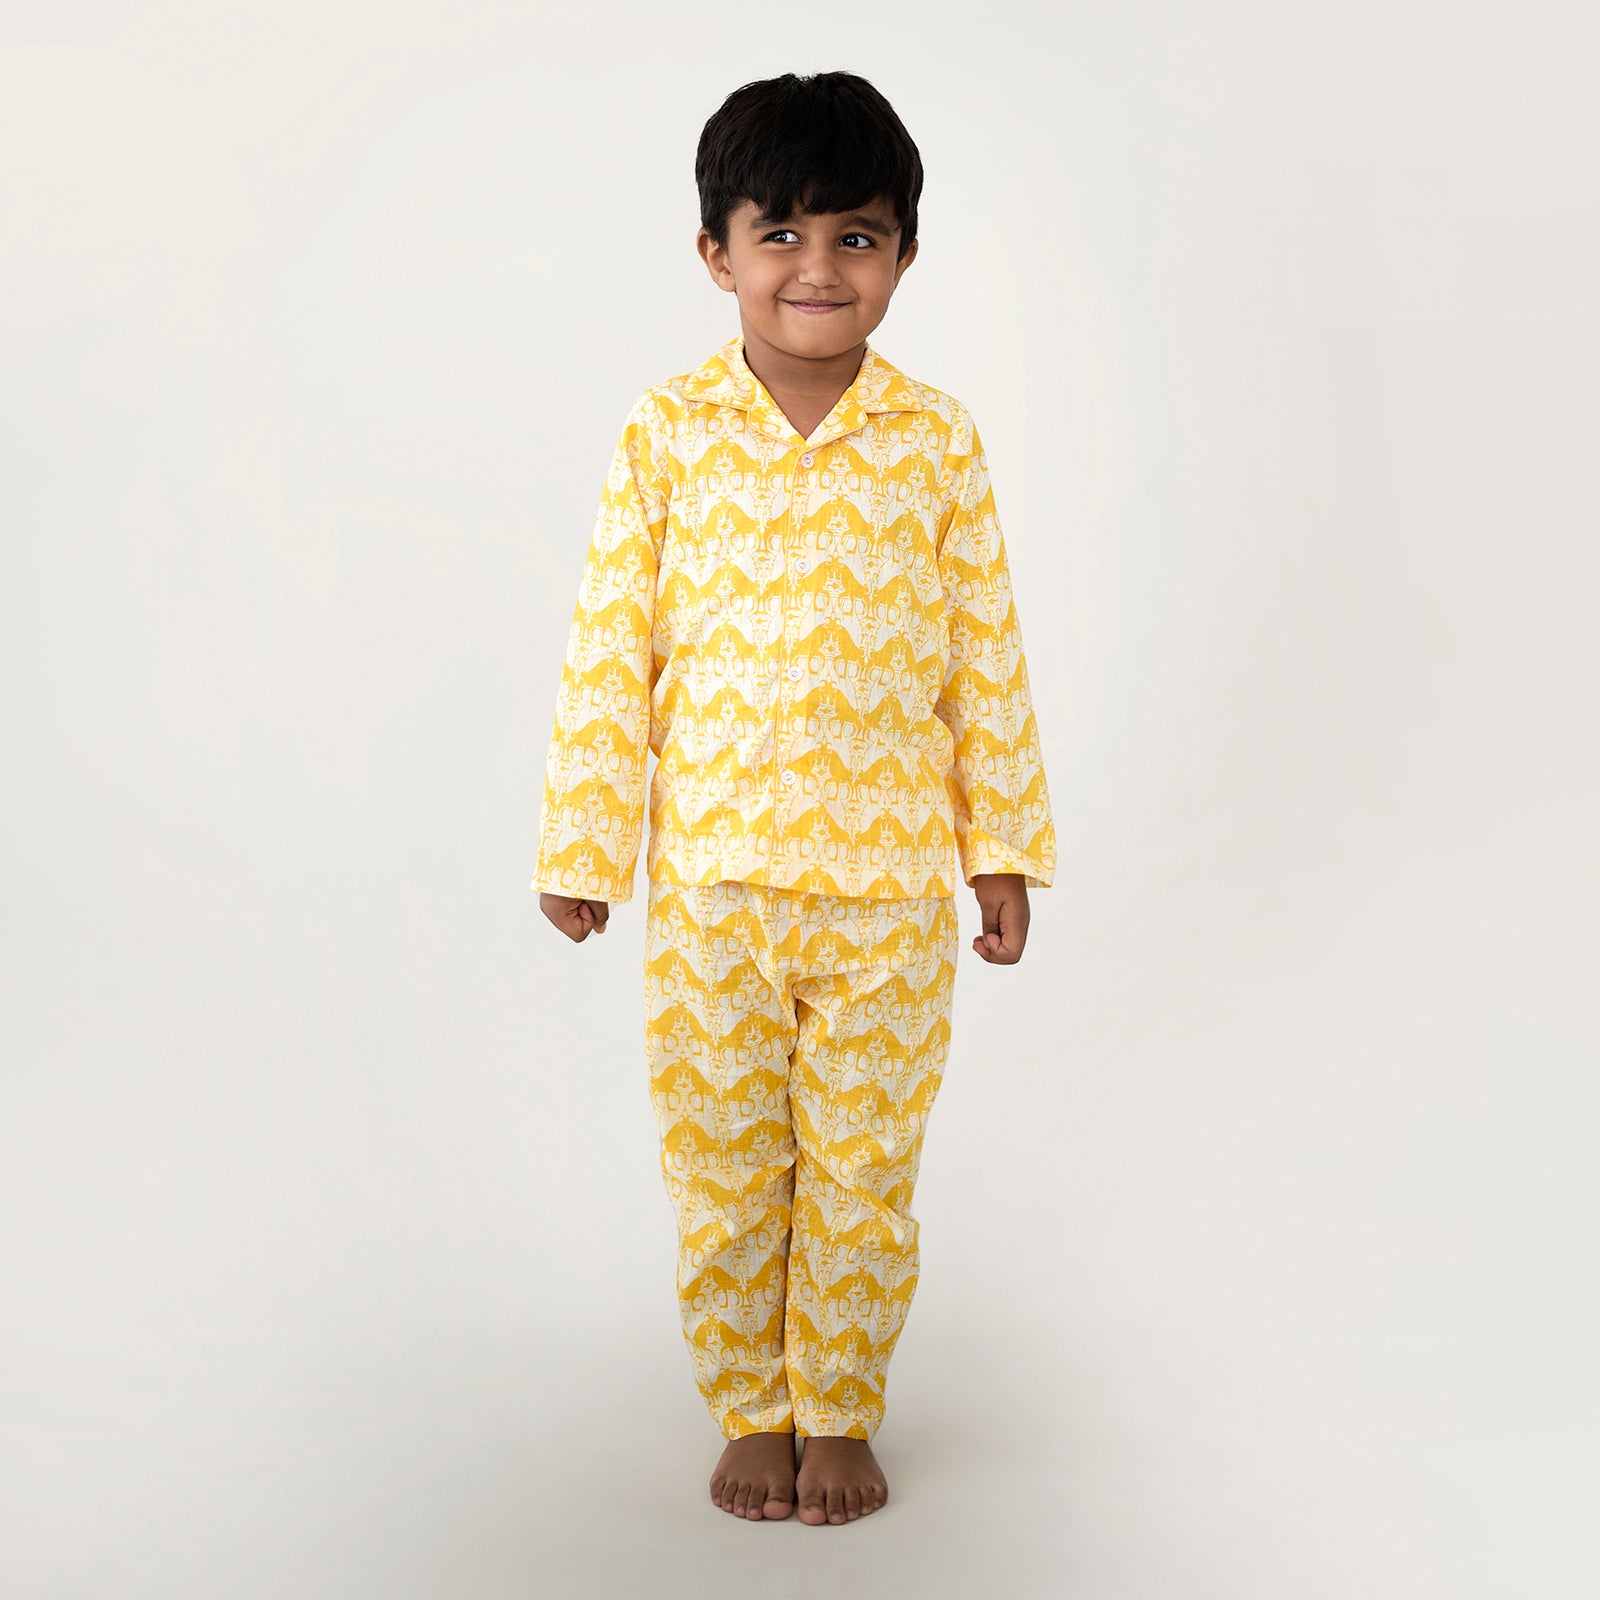 Cotton Boys Sleepwear with Two Silly Goats Story print